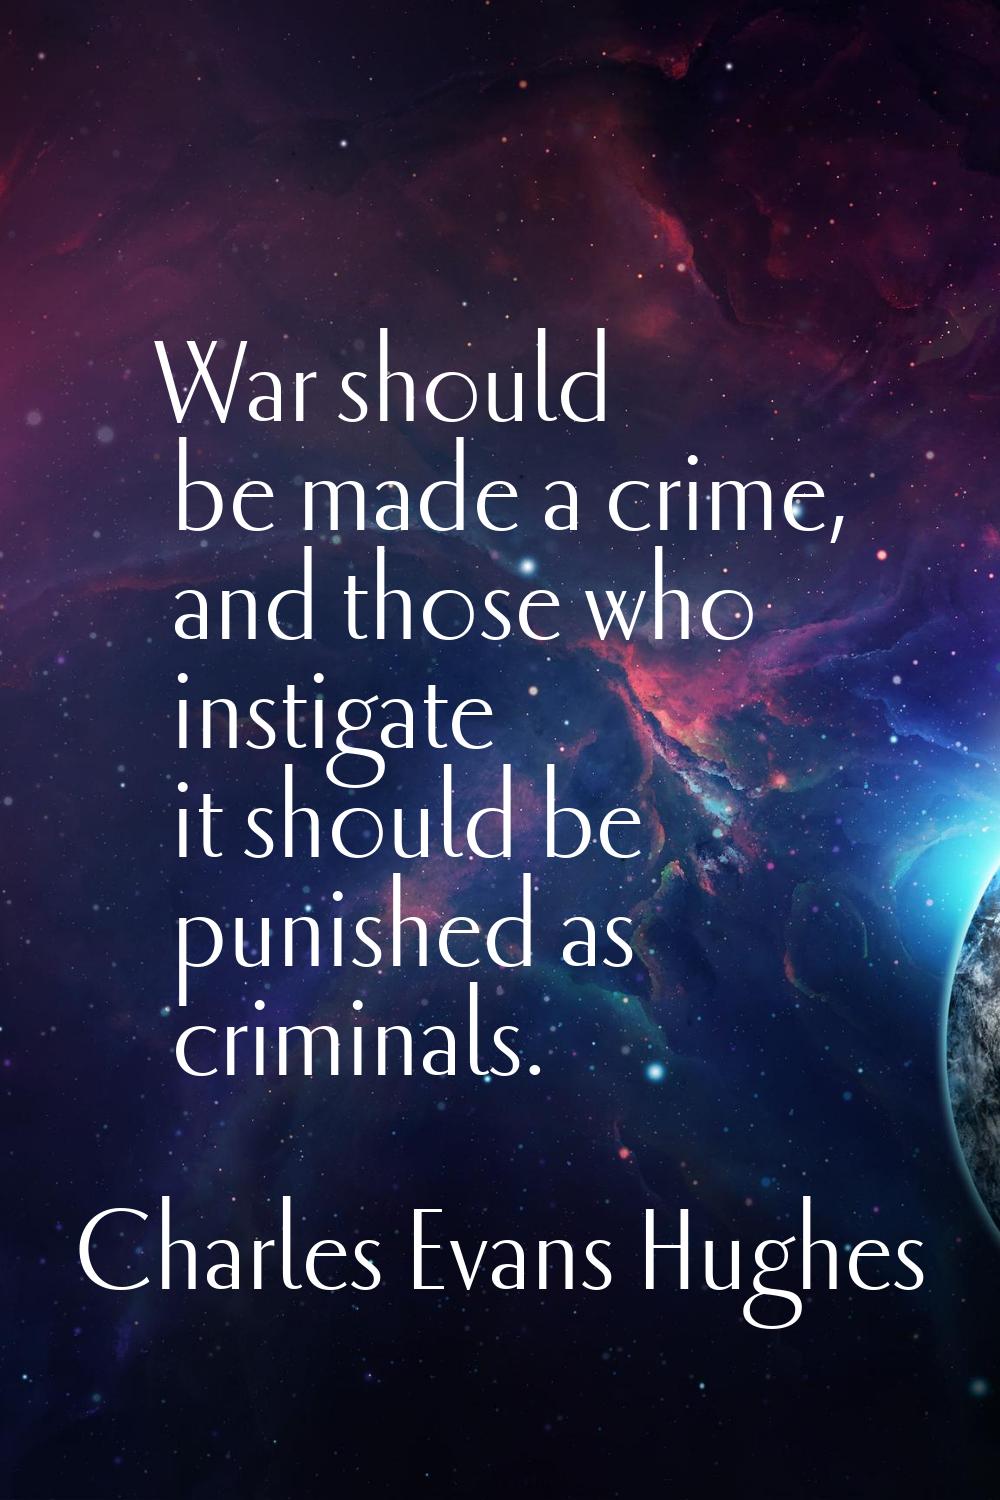 War should be made a crime, and those who instigate it should be punished as criminals.